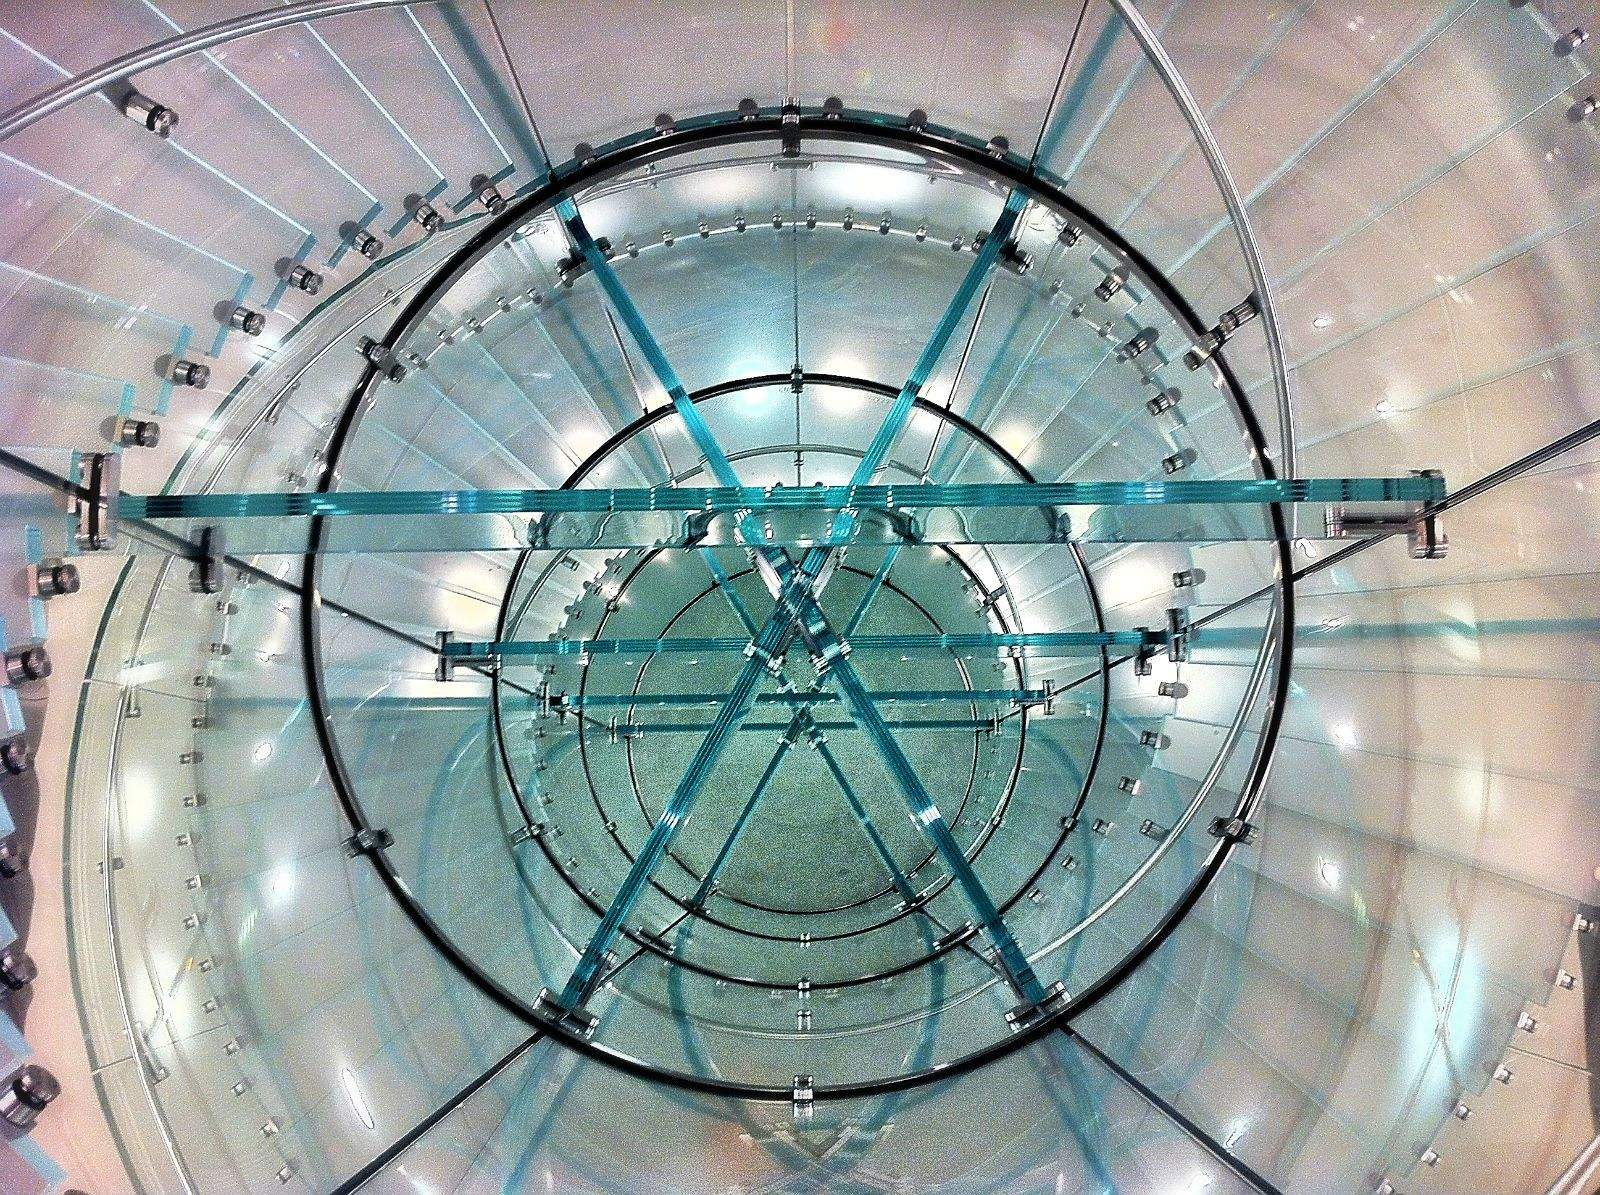 The Apple Store on  Boylston Street in Boston boasts a remarkable spiral staircase. Photo: Joseph Thornton/Flickr CC